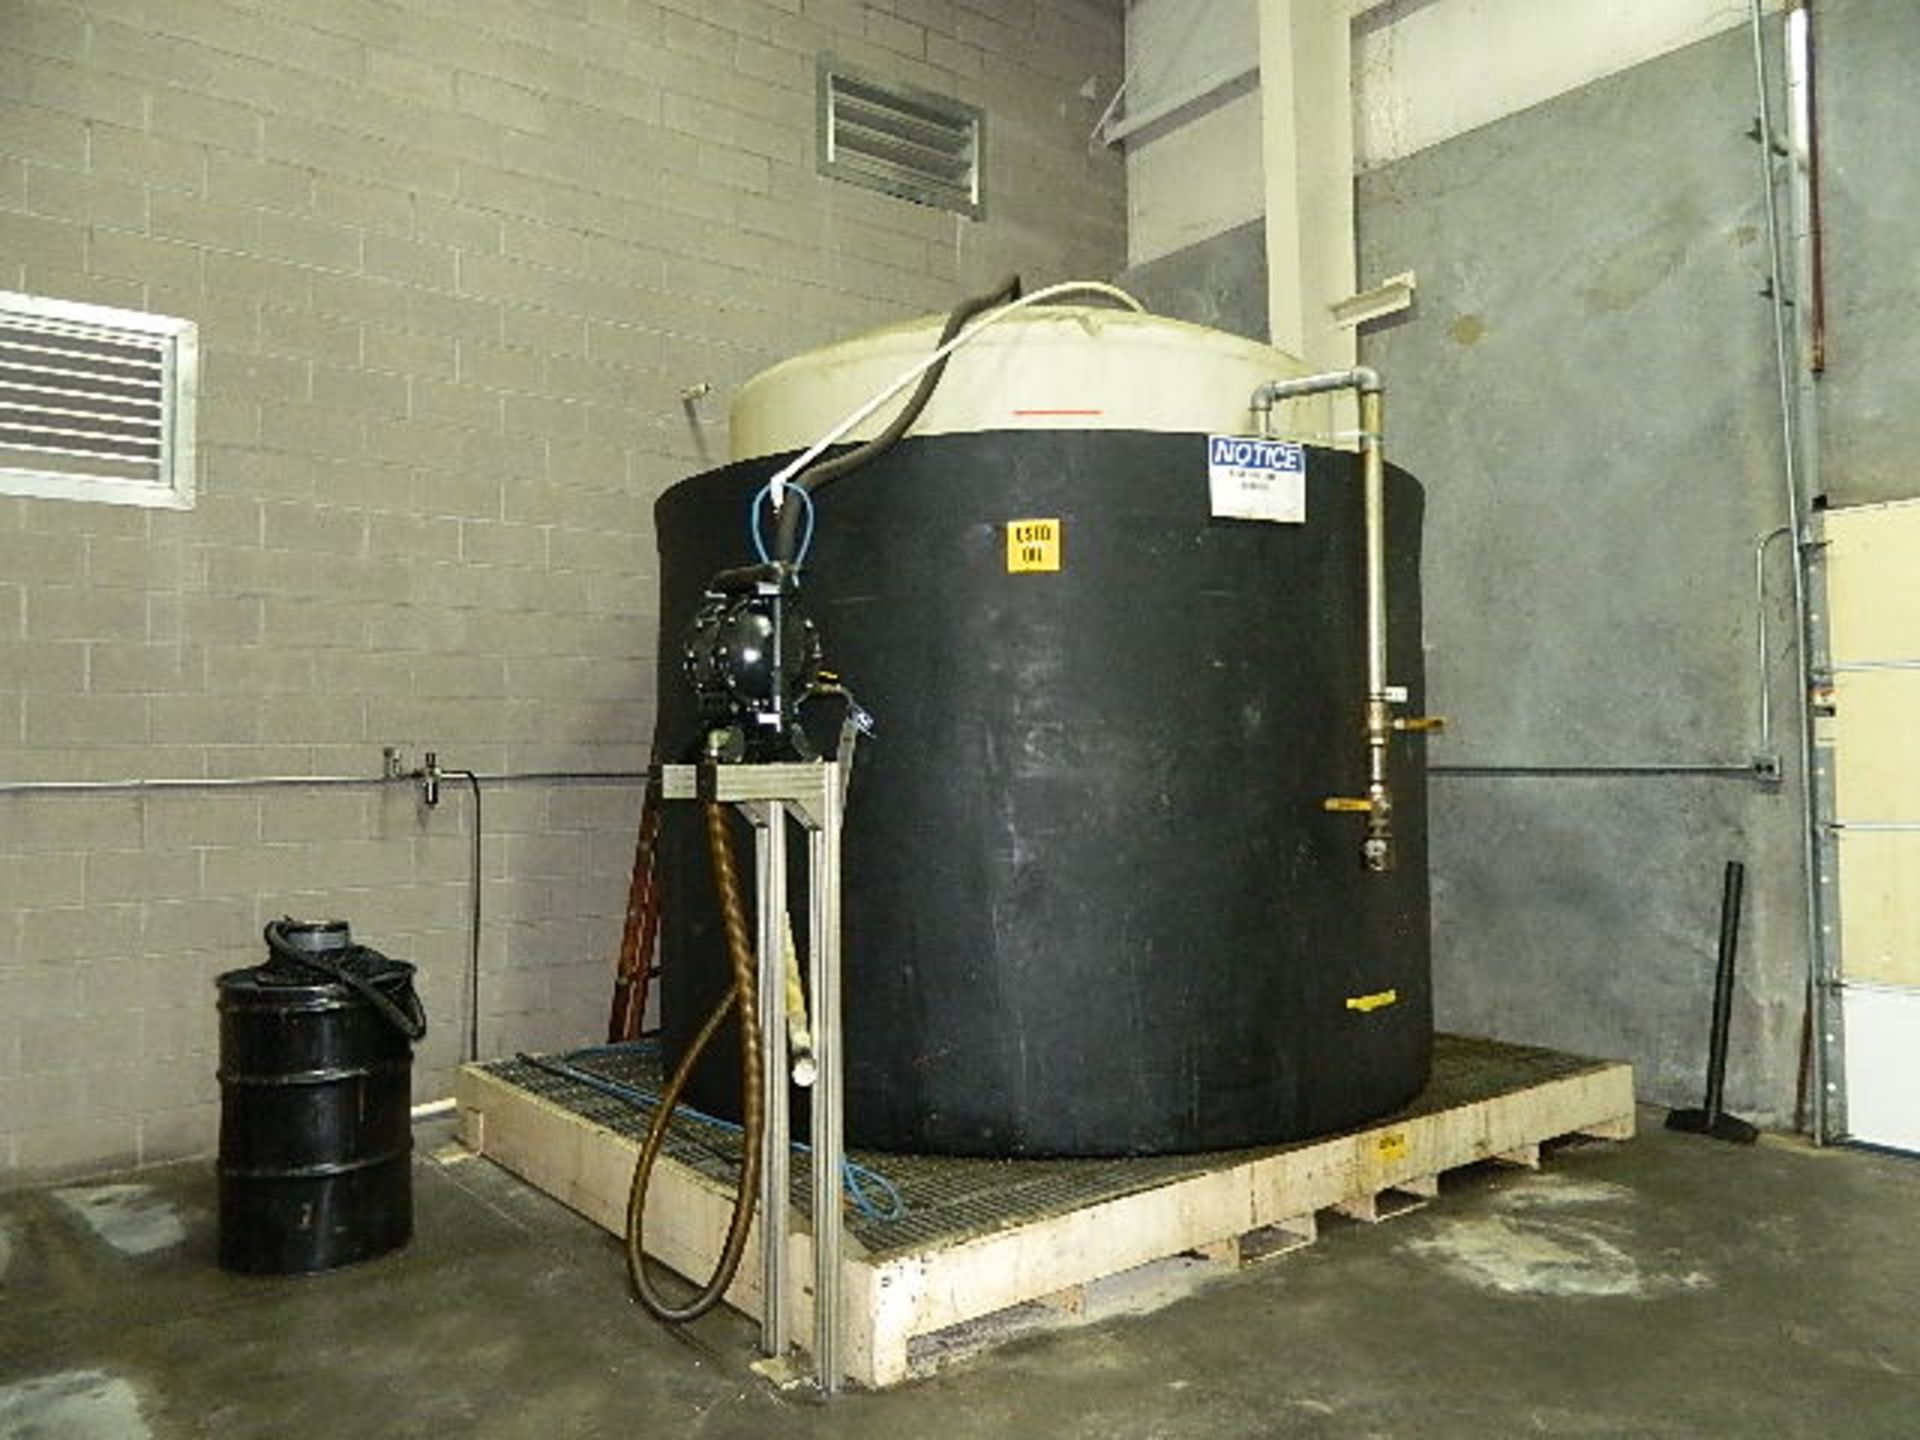 2500 Gal. Coolant Tank w/ 2500 Gal. Containment Basin & Steel Drip Basin, 10' x 12' ARO - Image 3 of 6